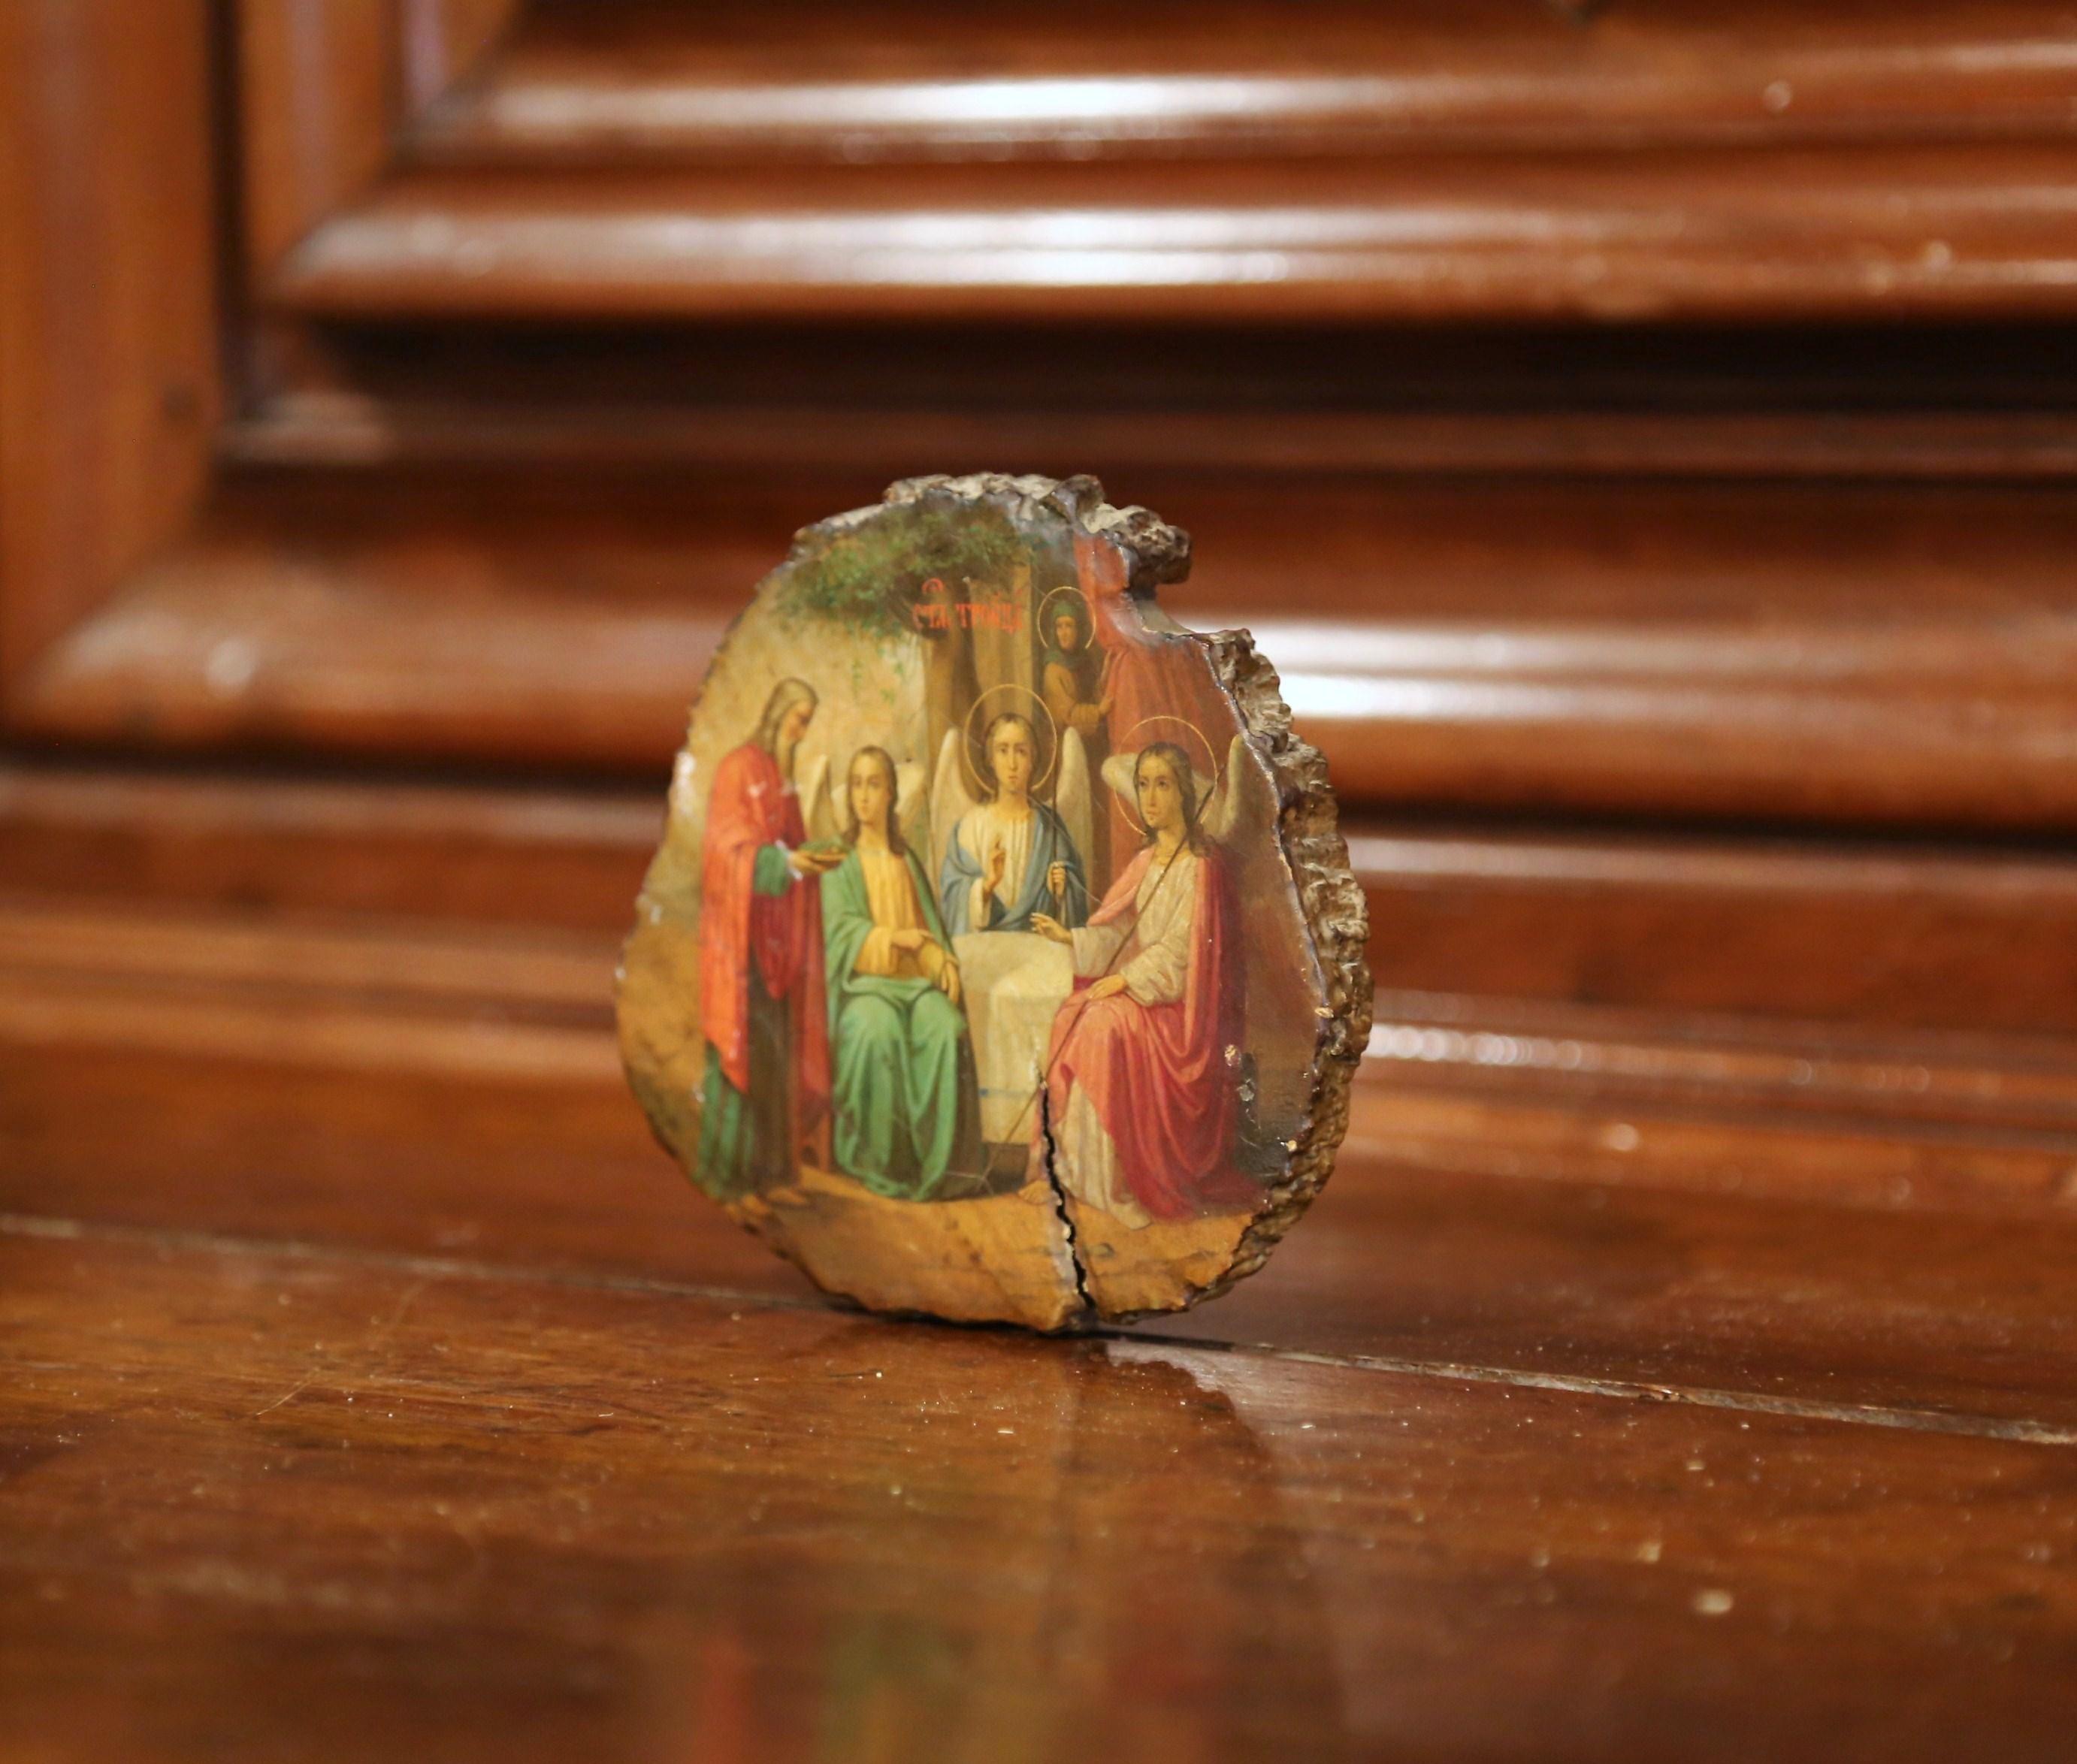 This small, antique icon was found in France, and was crafted in Russia, circa 1860. The religious art work features Abraham, the Father, and the three angels visiting him (Genesis 18: 1-15). The round, hand painted scene is in excellent condition